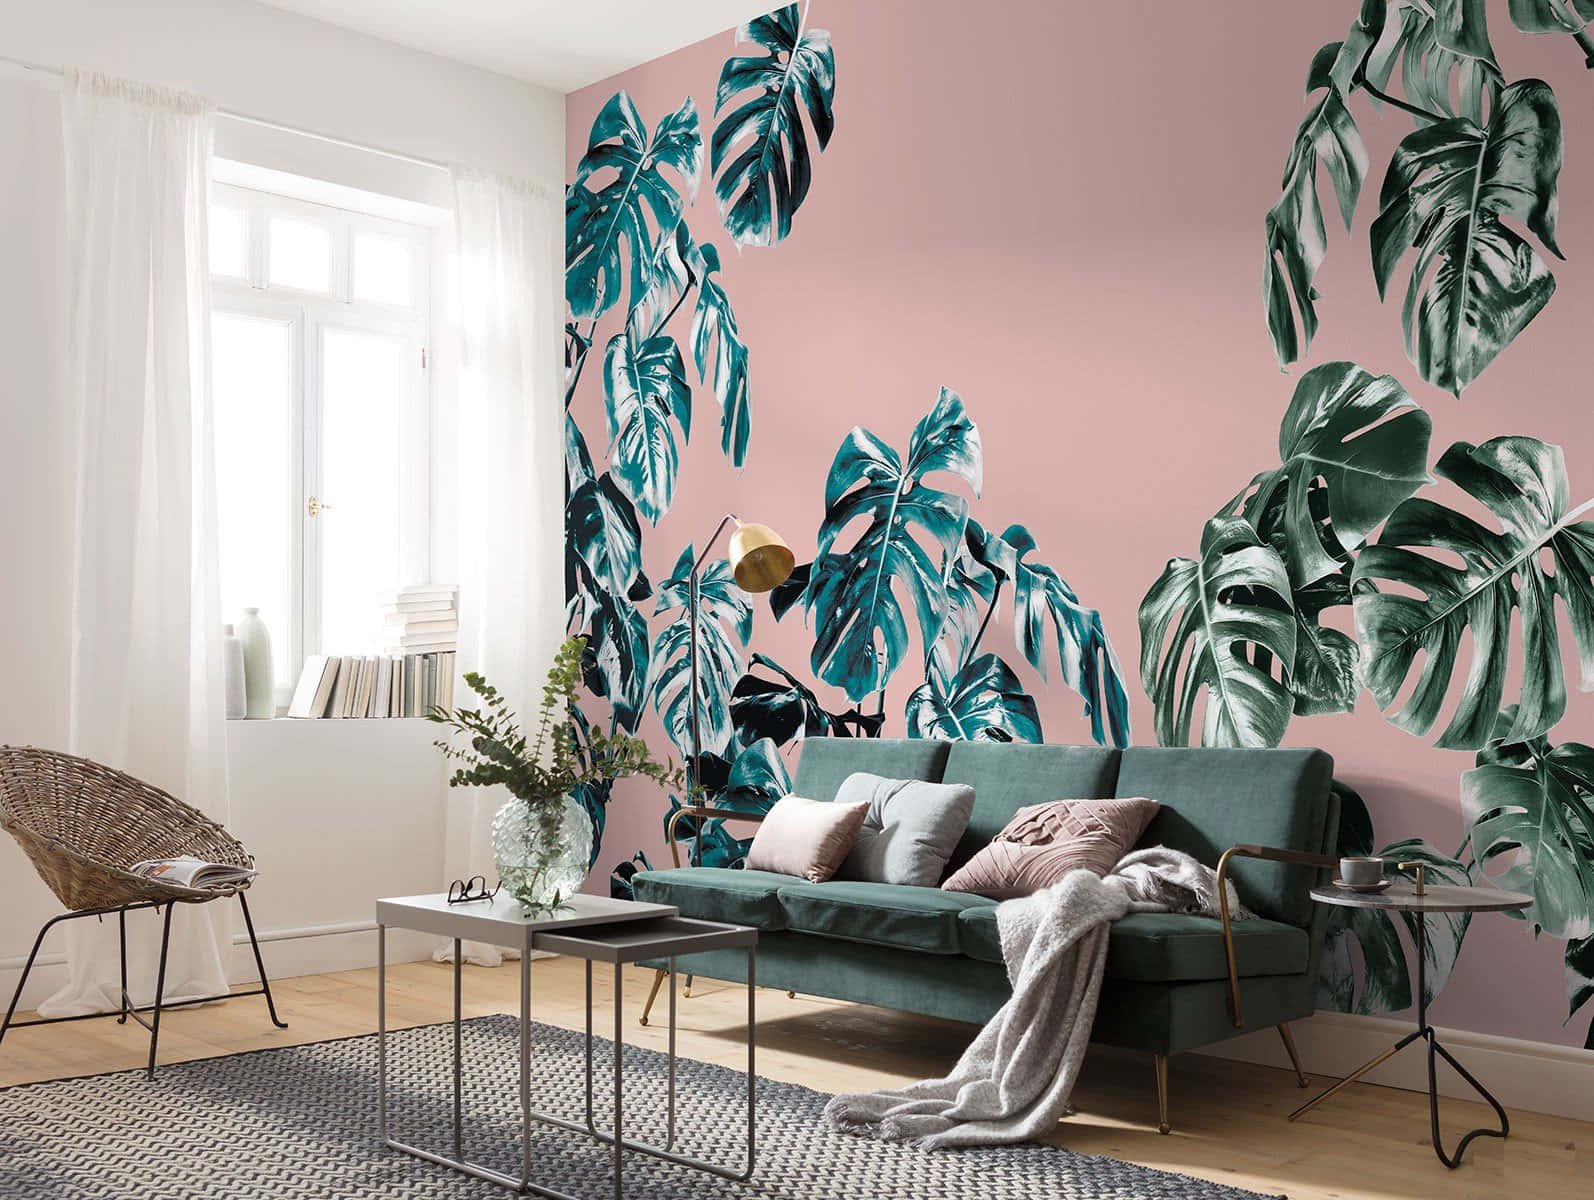 Give your living space an upgrade with modern home decor. Wallpaper